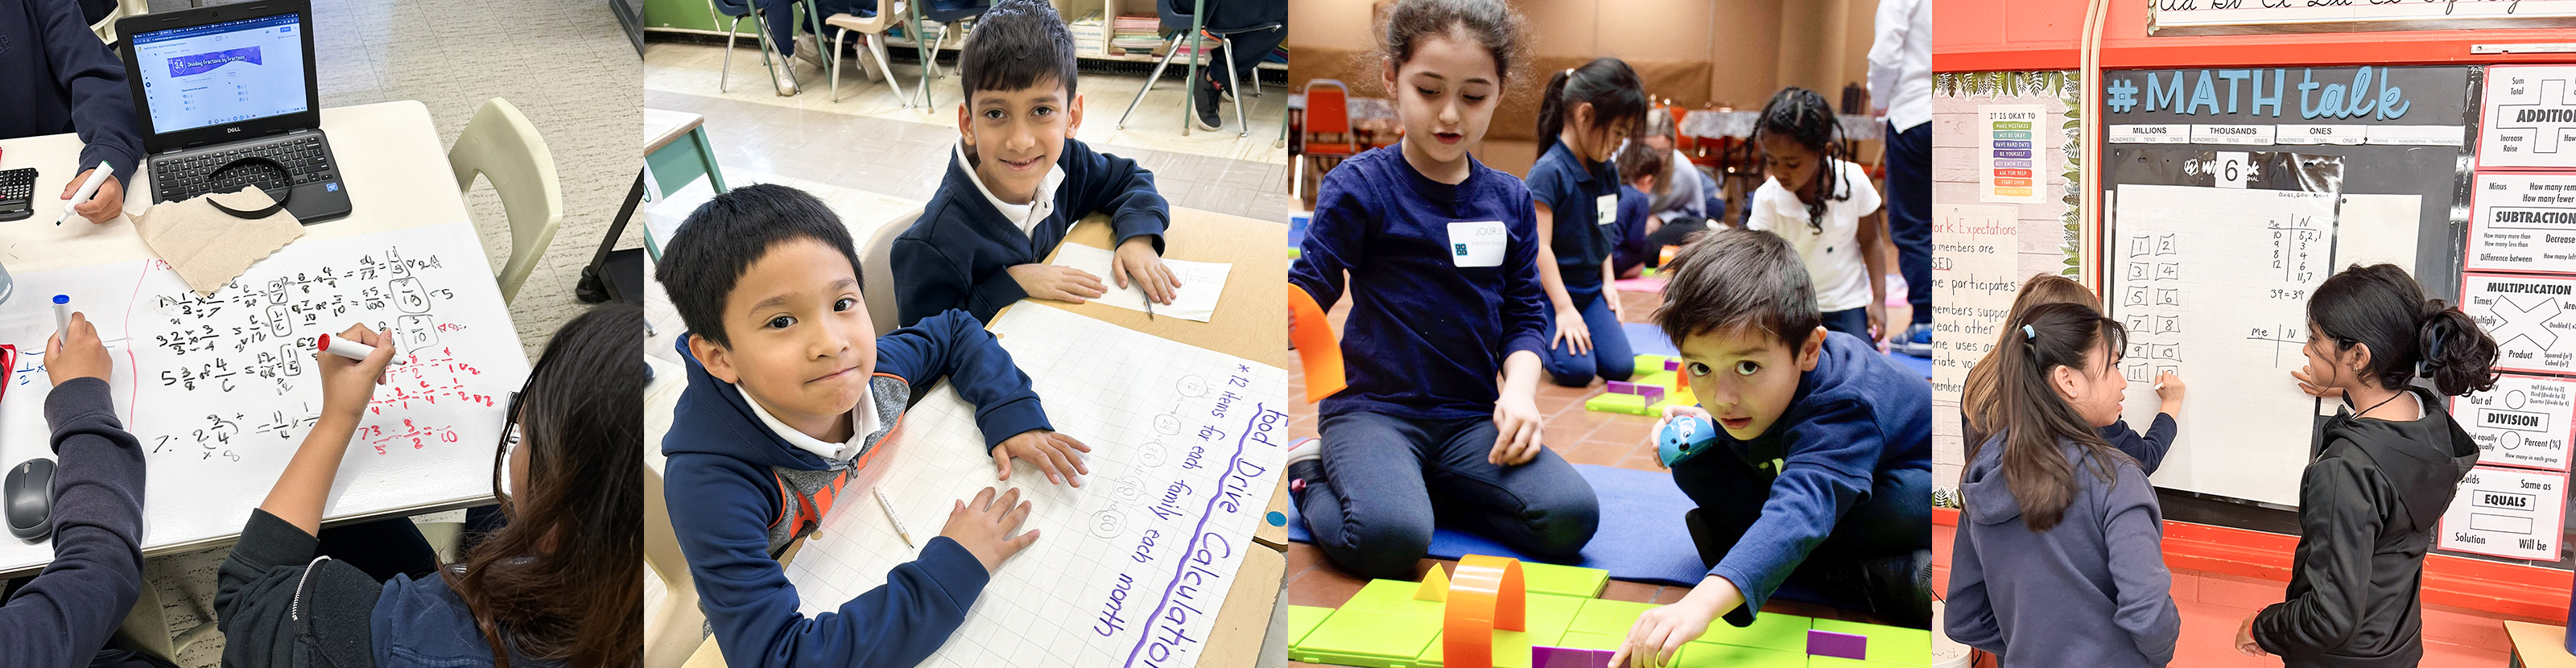 A banner composed of four images. The first photo shows students in uniform working on math sums on large sheets of paper taped to their desks, while consulting a website open to a math resource page. The second photo shows two students at their desks working on a calculations on a large sheet of paper taped to their desk. The third photo shows two students working with colourful math manipulatives on the floor while a teacher encourages them. The fourth photo shows three students working on math sums on a large sheet of graphing paper taped to the chalkboard.